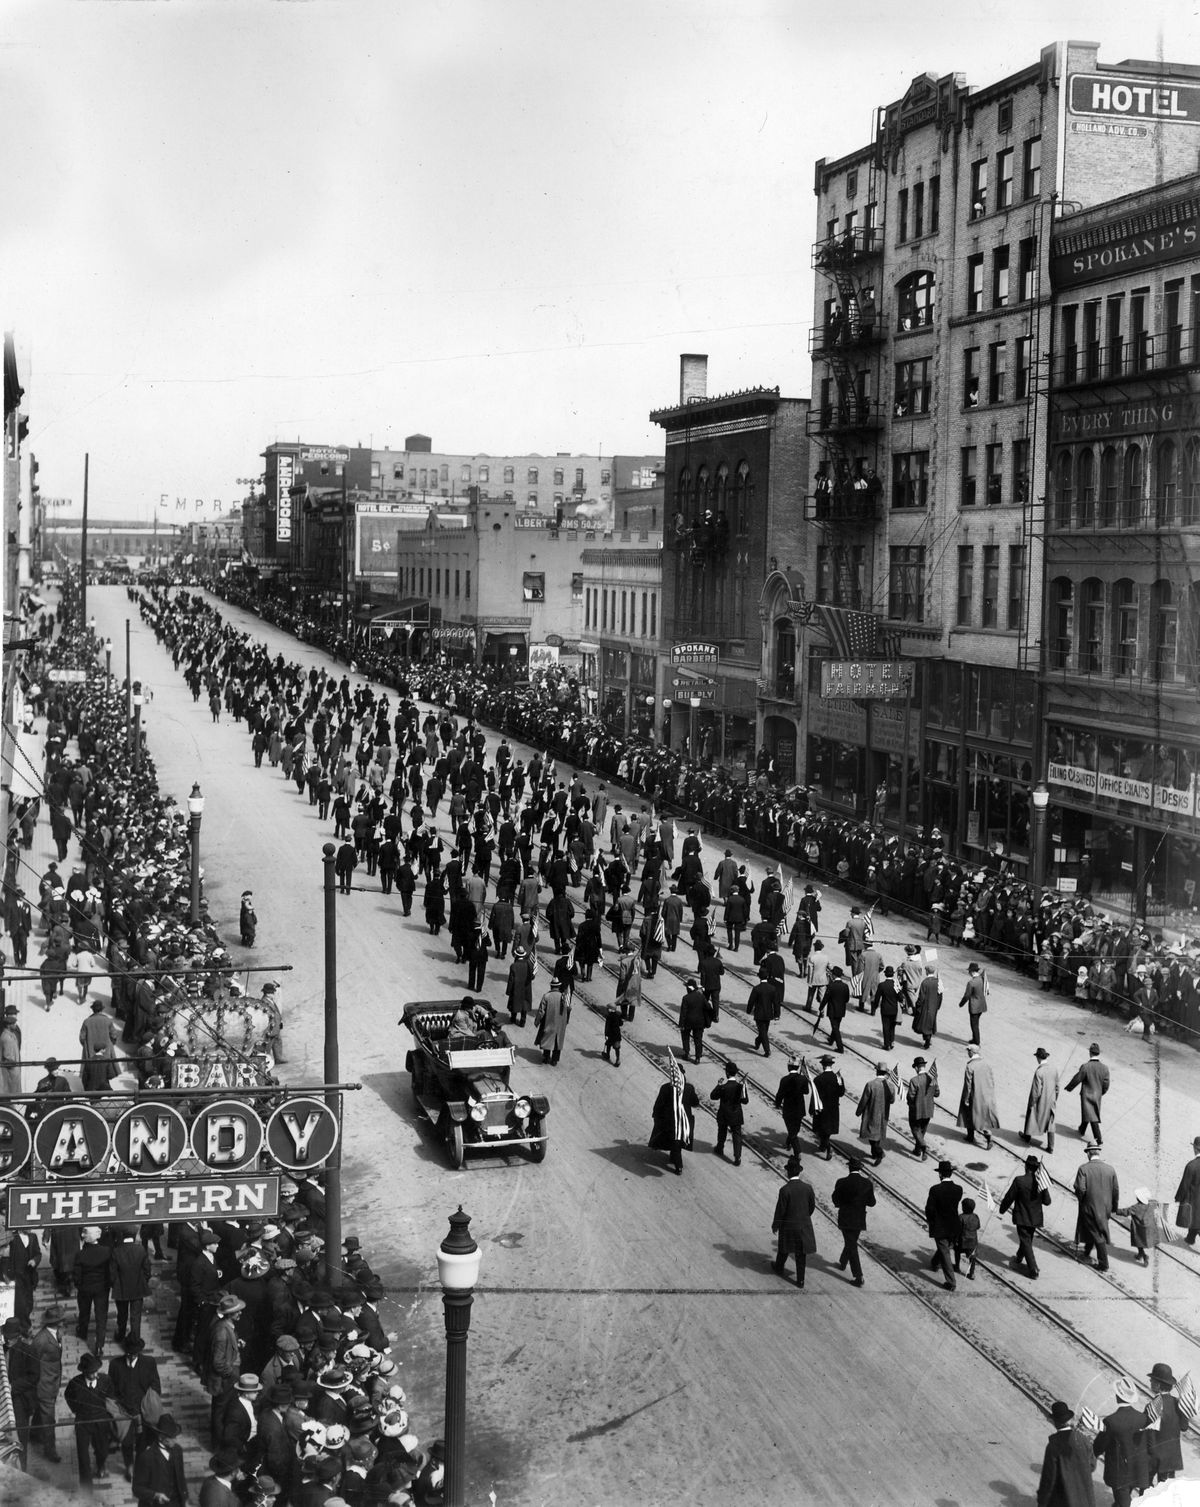 May 30, 1916: More than 3,150 local businessmen and professional men march through downtown Spokane in the Memorial Day Preparedness Parade. The parade was held to show enthusiasm for national defense preparedness.